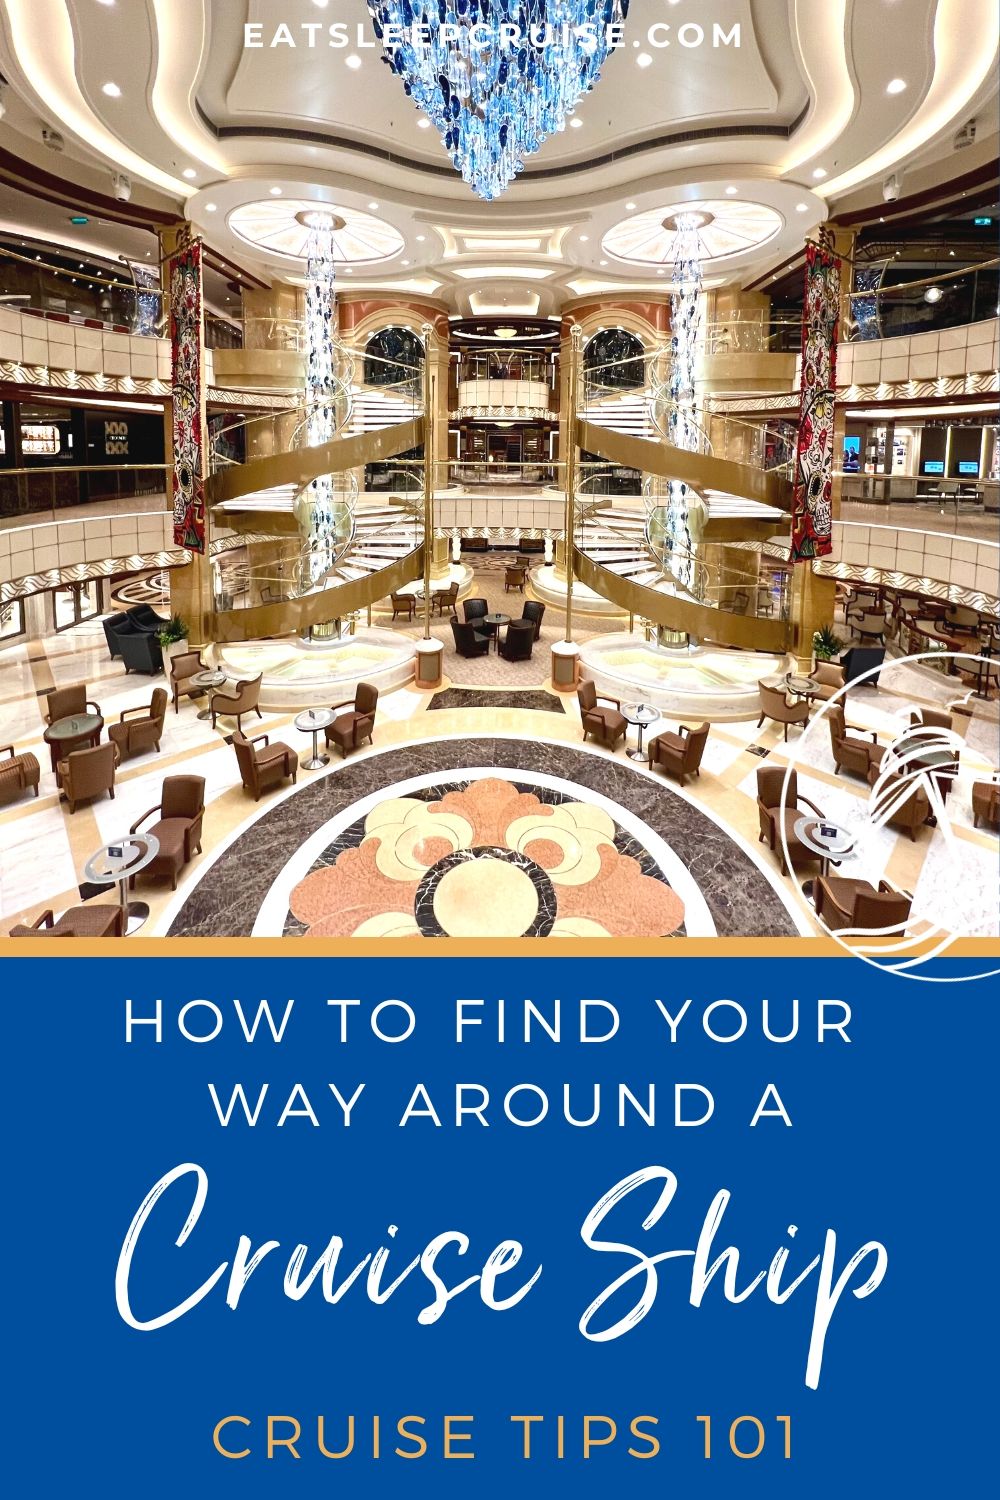 How to Find Your Way Around a Cruise Ship: Bow vs. Stern and Forward vs. Aft